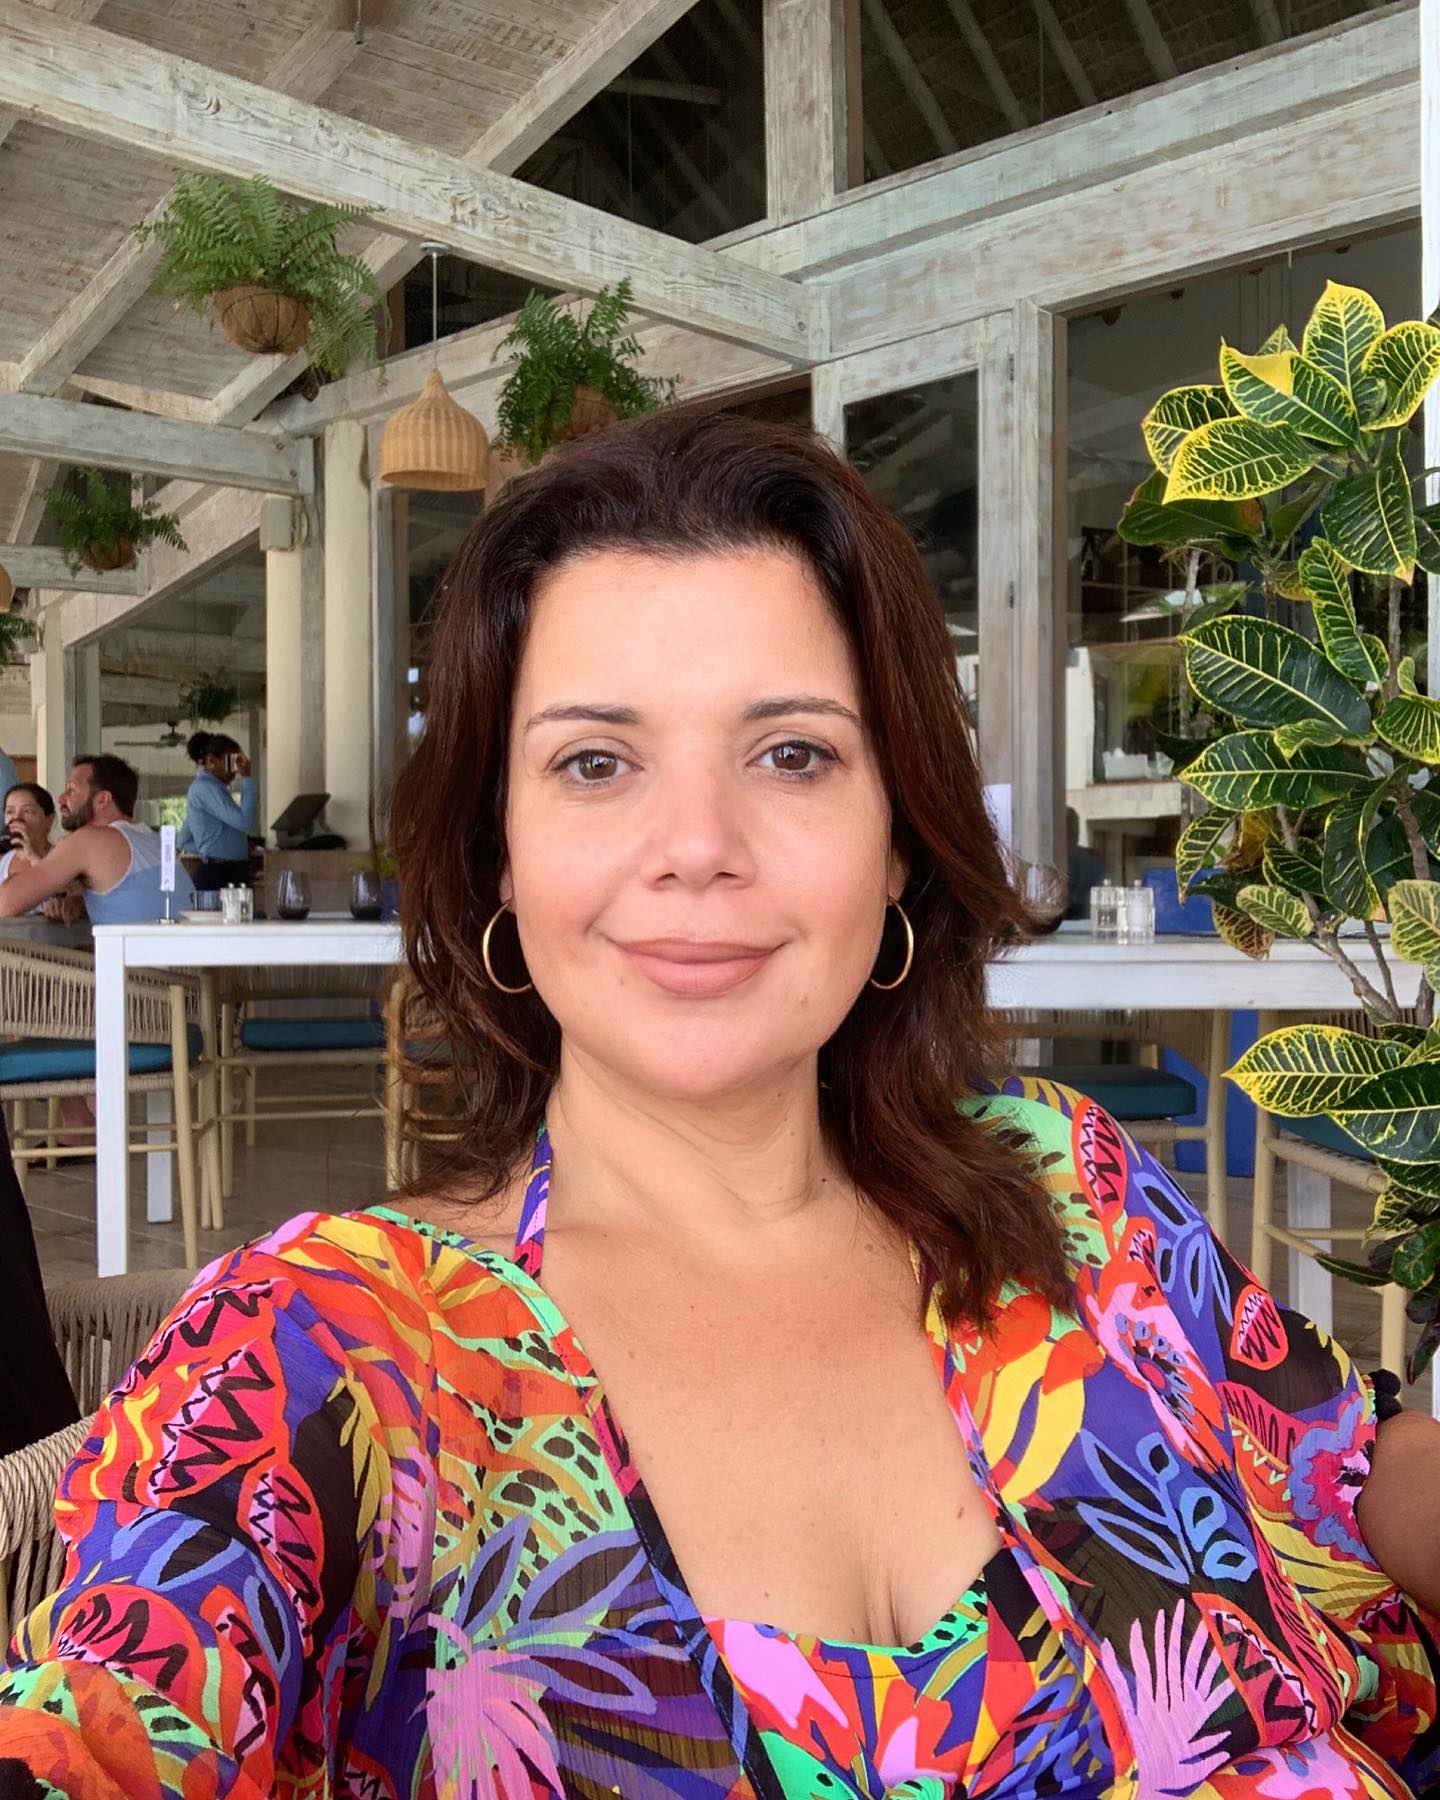 While Sunny worked another gig over the weekend, View co-host Ana Navarro enjoyed a Dominican Republic getaway amid the talk show break